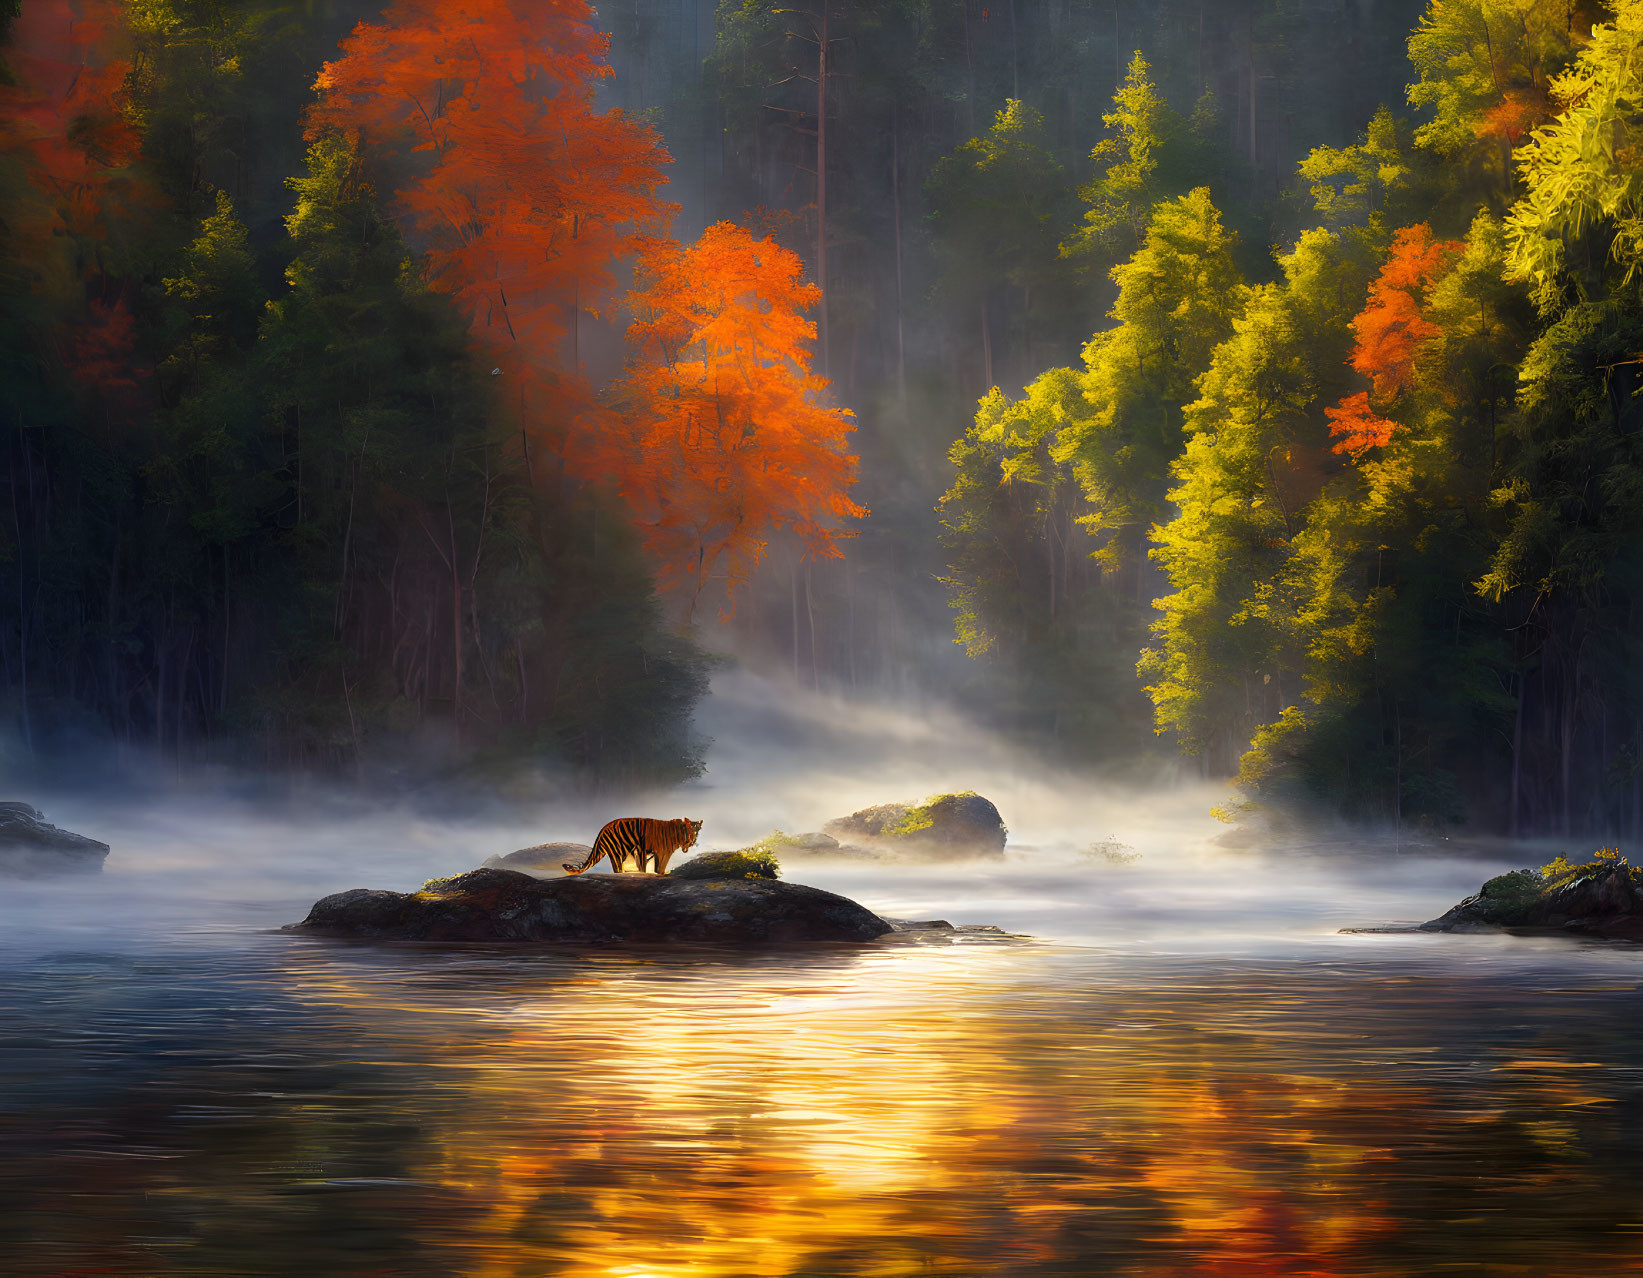 Tiger on Rock in Tranquil River with Autumn Forest Reflections